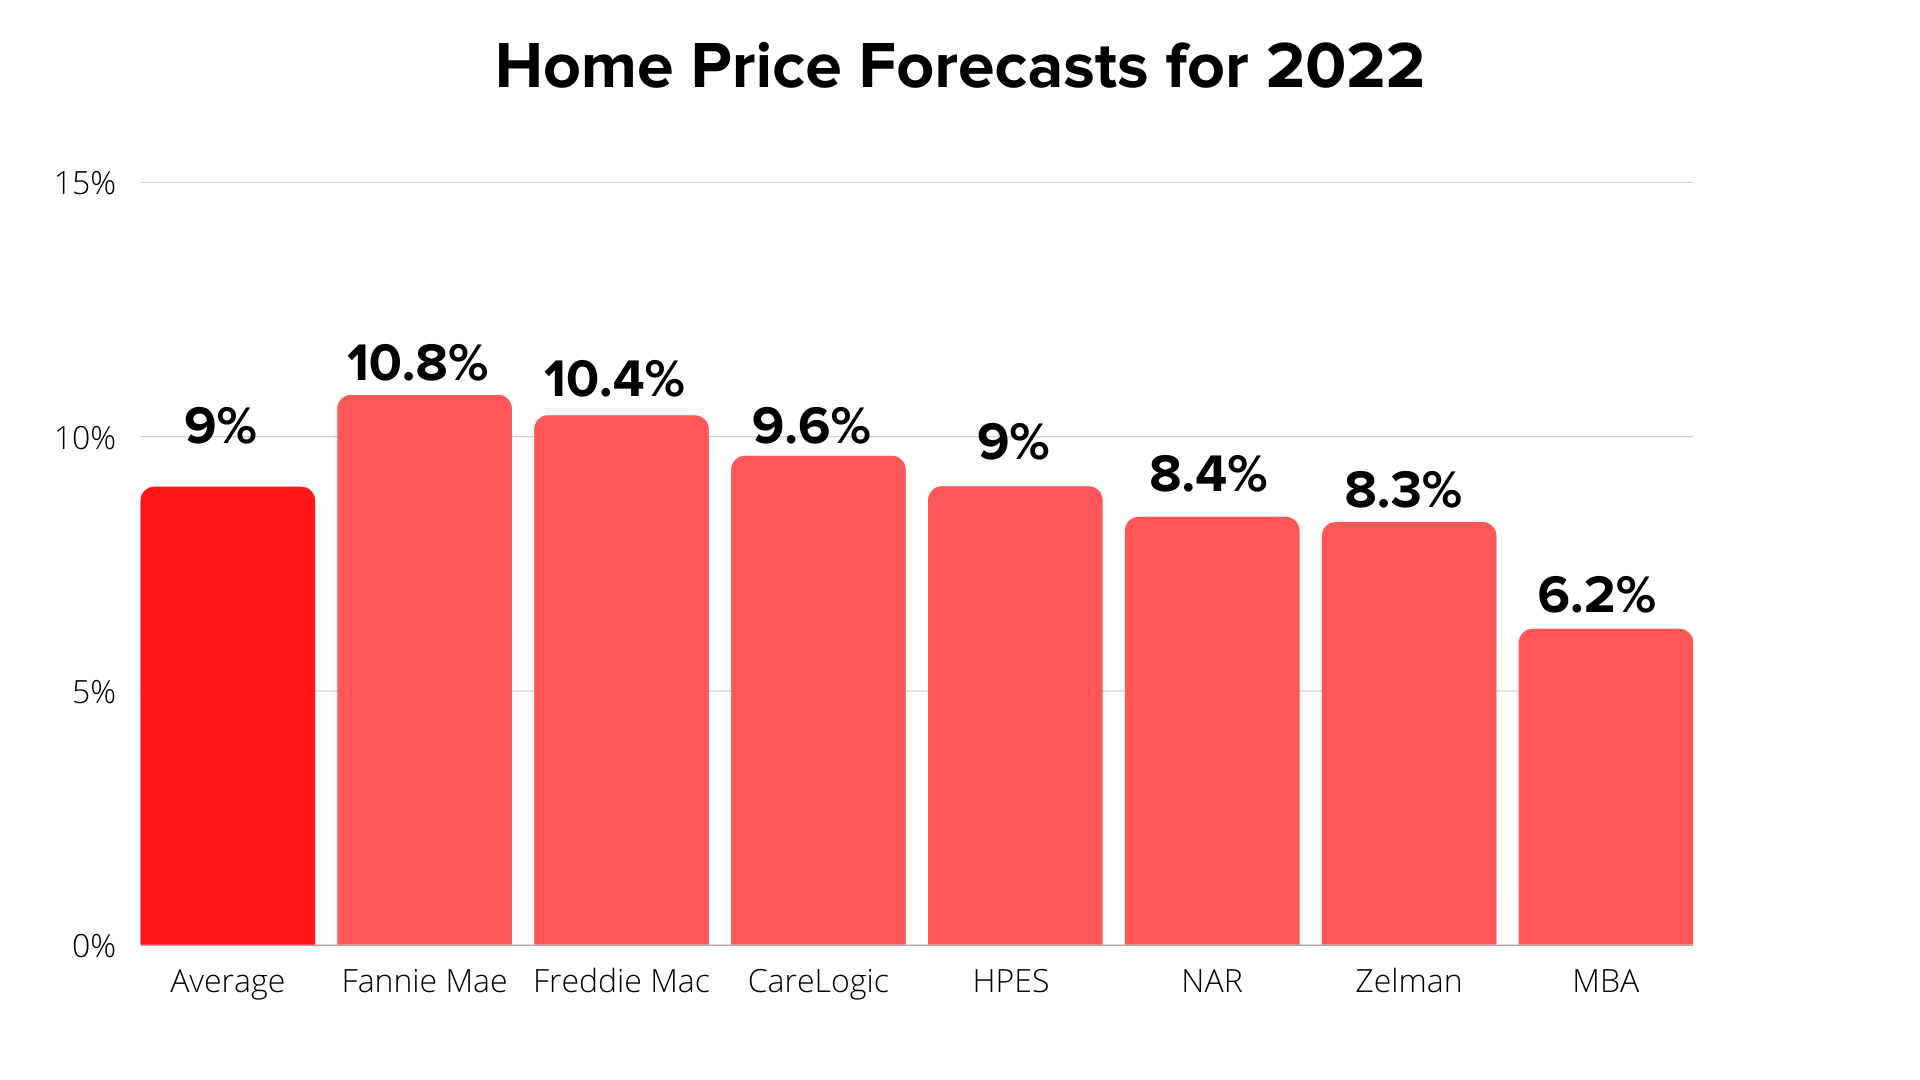 Home Price Forecasts for 2022